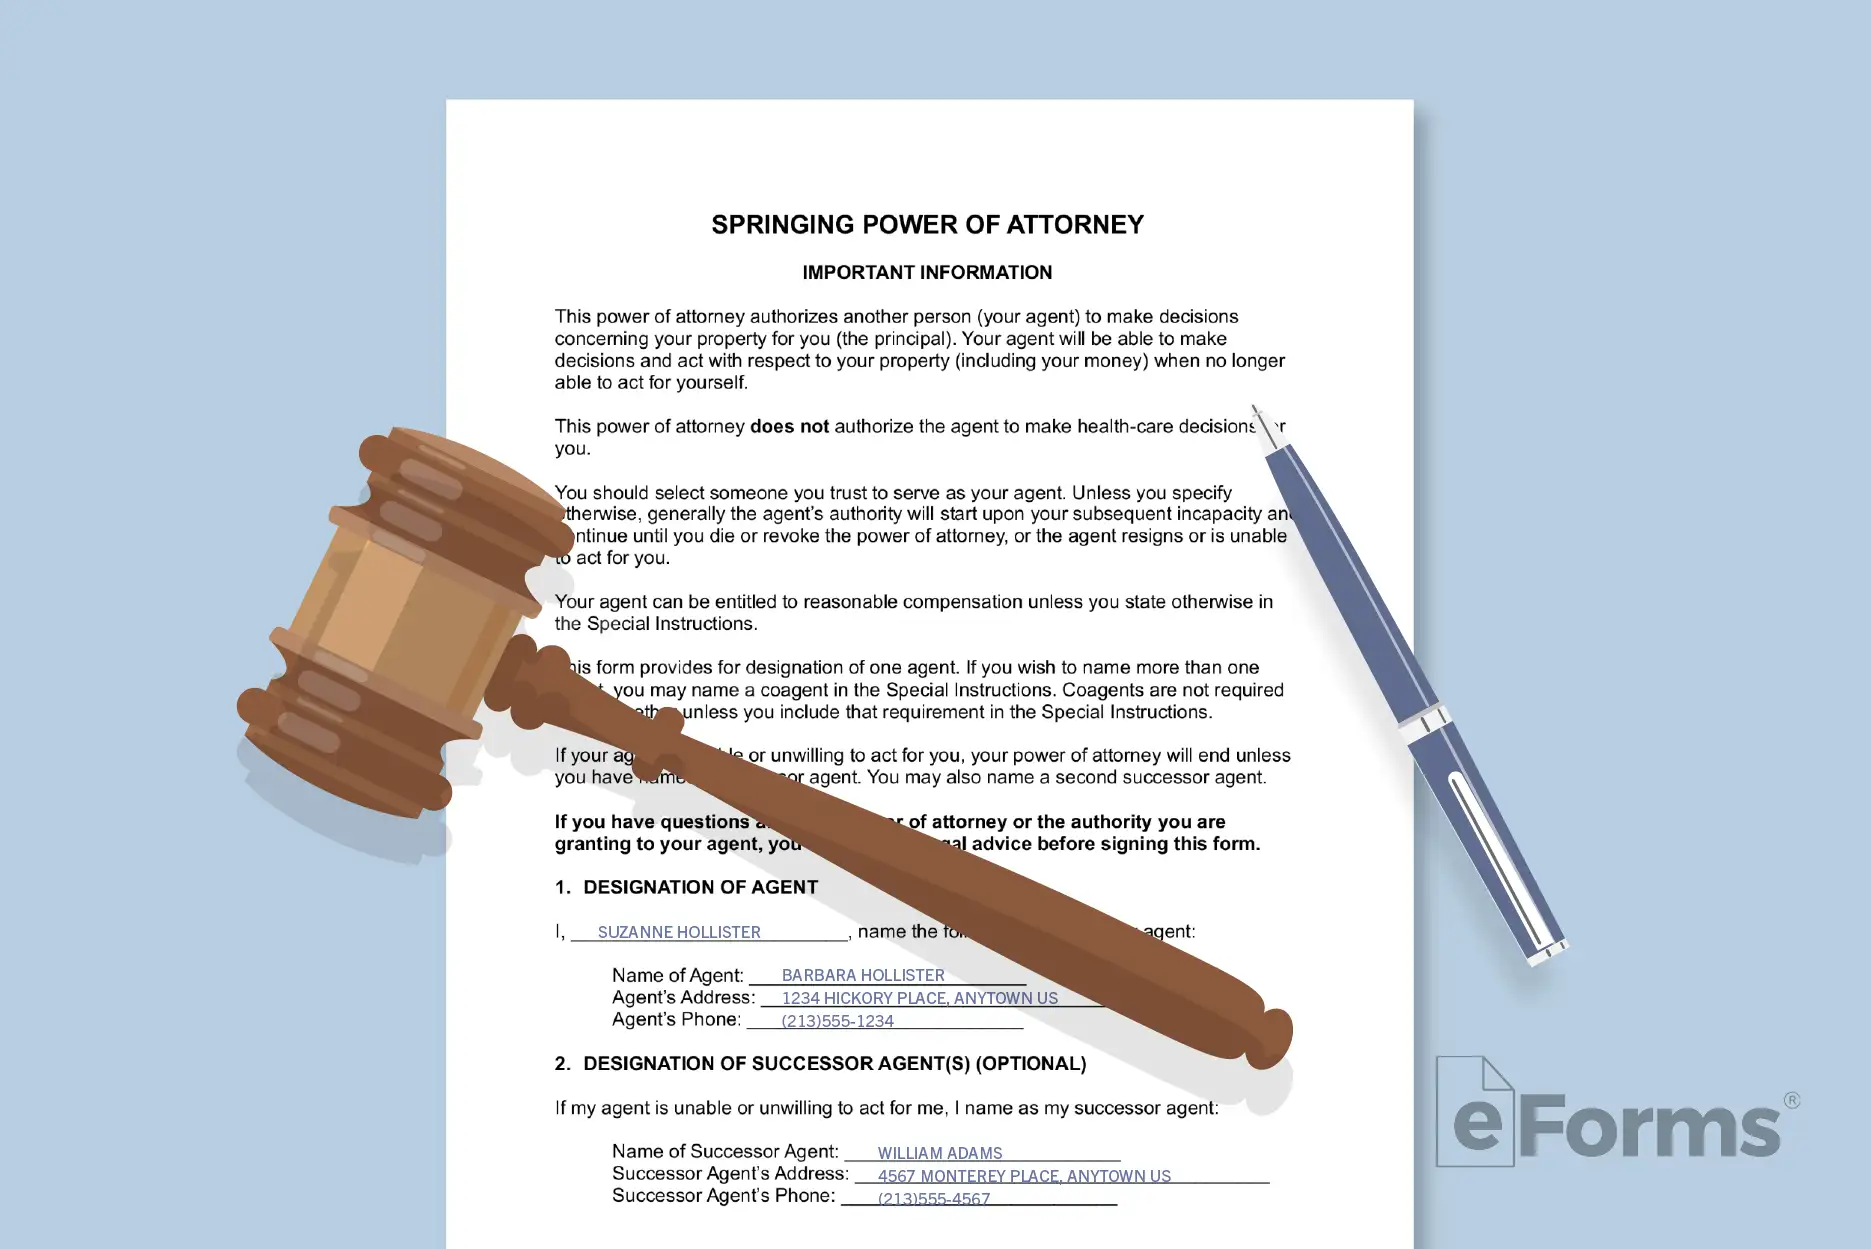 Springing Power of Attorney document with gavel and pen.